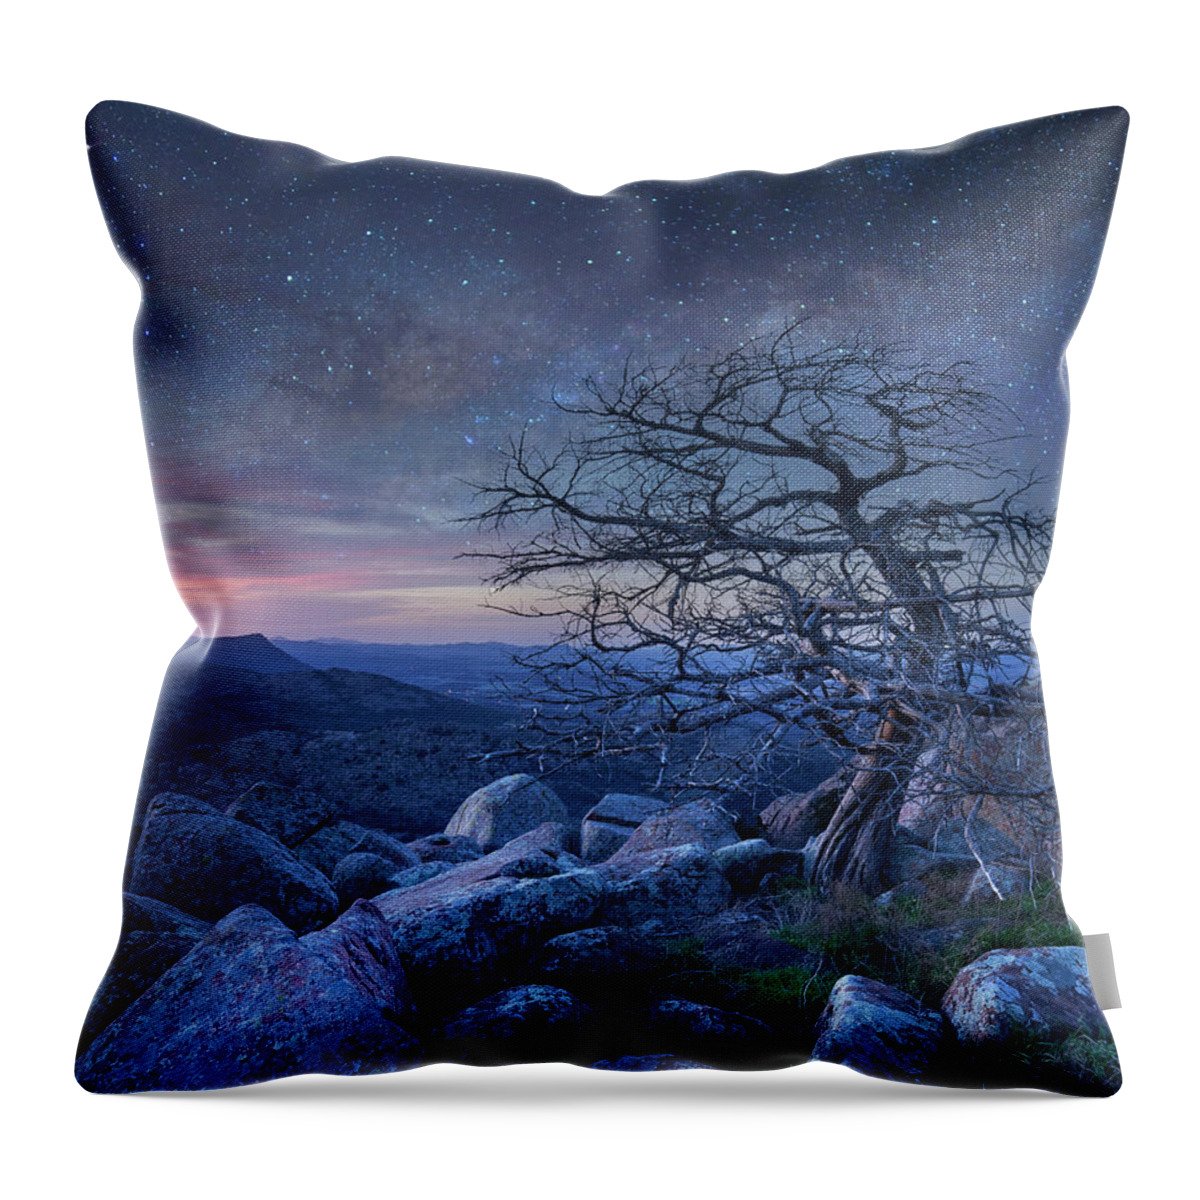 00559646 Throw Pillow featuring the photograph Stars Over Pine, Mount Scott by Tim Fitzharris